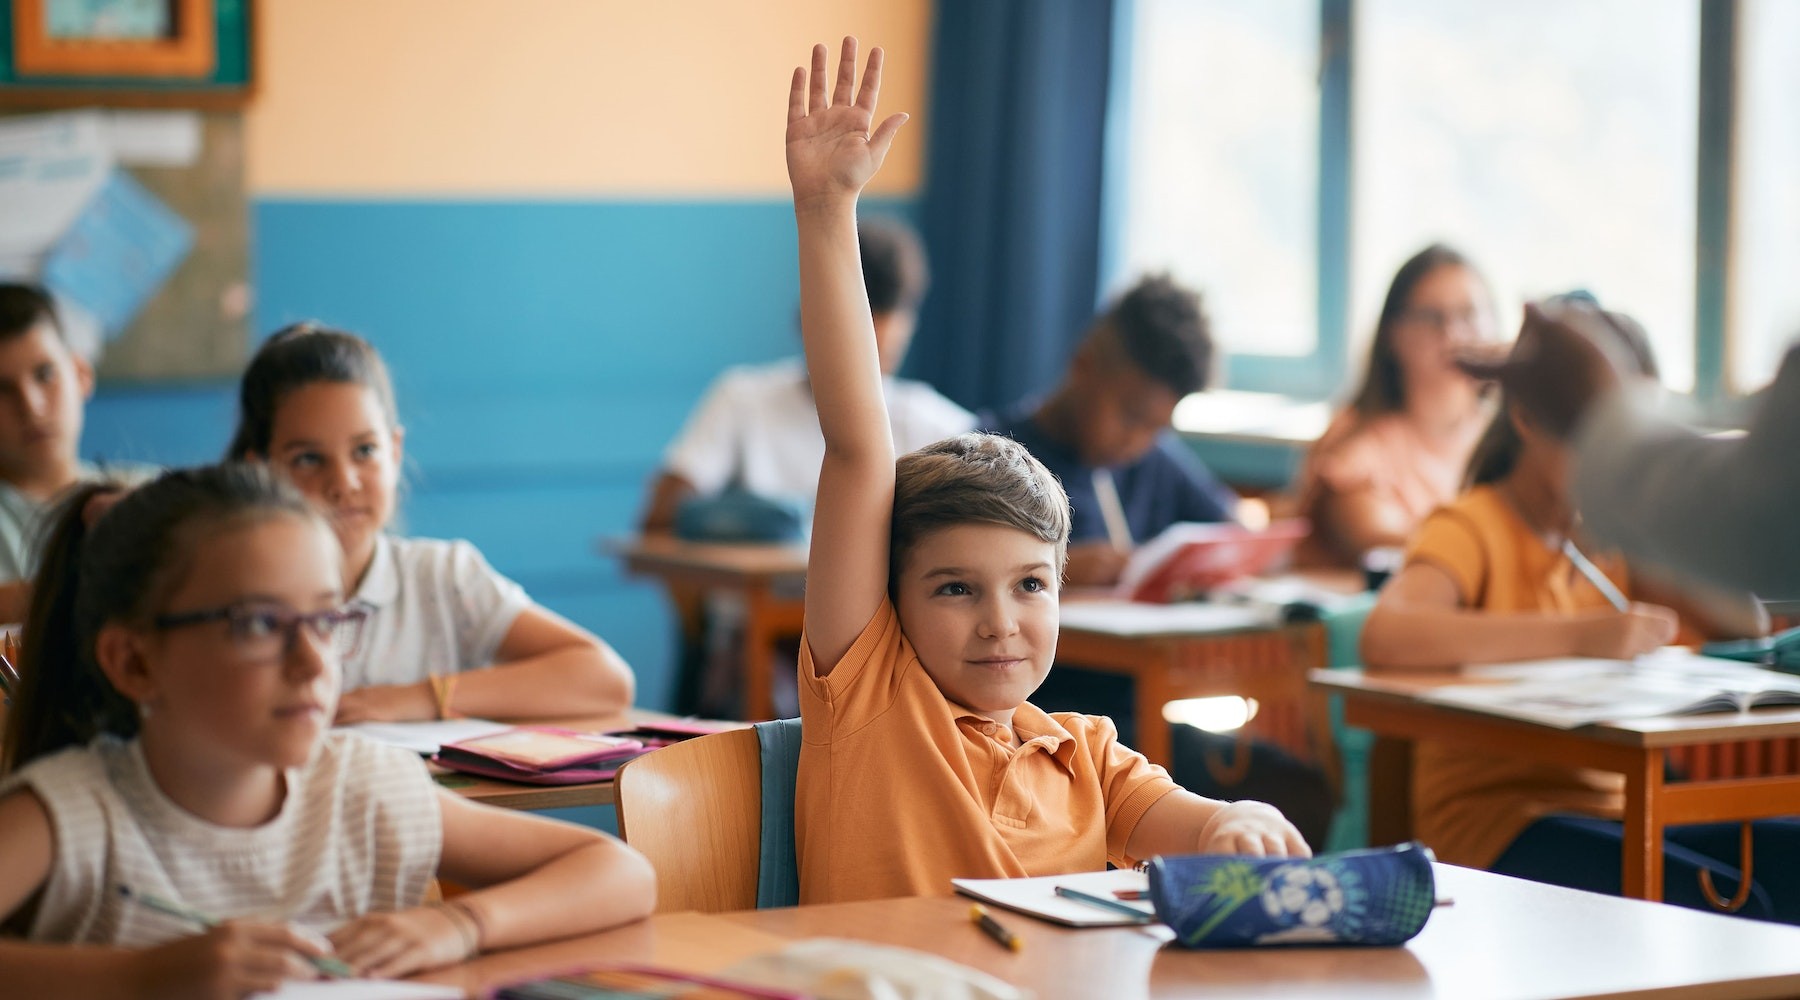 Child in classroom raising hand to answer a question.